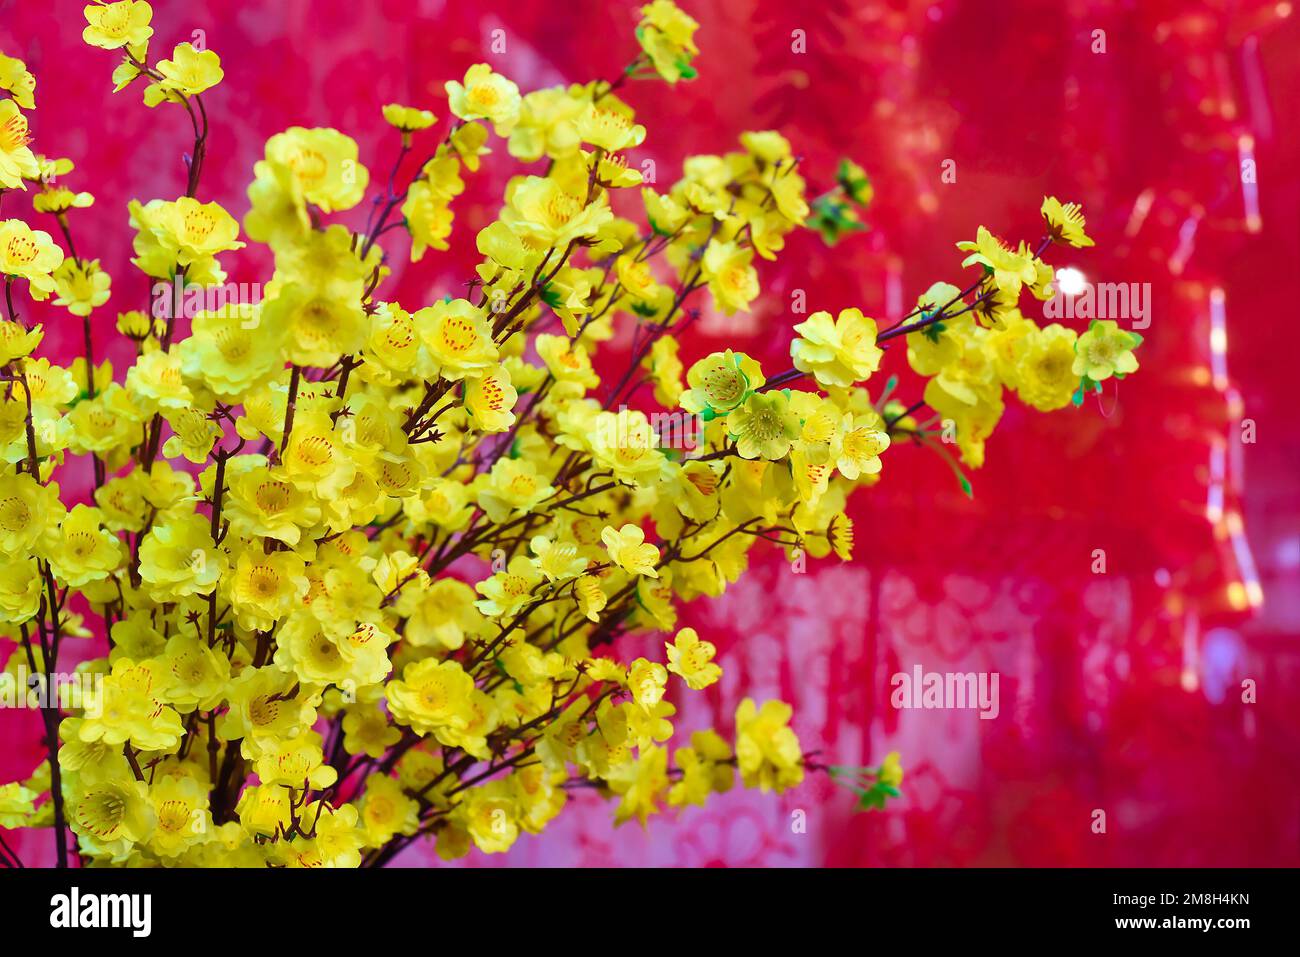 decoration and yellow flowers for Tet Lunar New Year Stock Photo